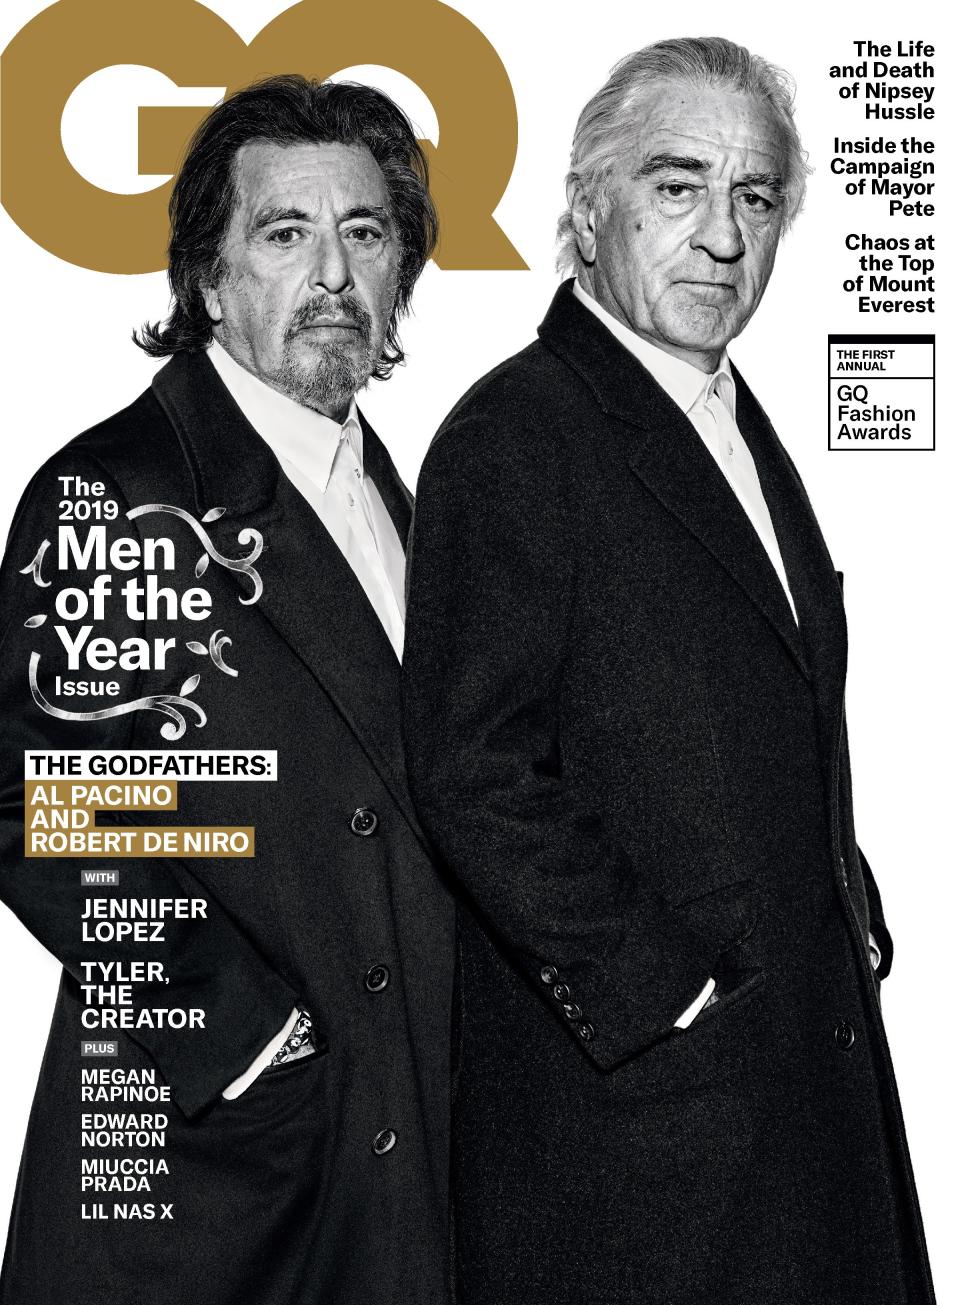 Al Pacino and Robert De Niro are GQ's Godfathers of the Year. Click here to subscribe to GQ.